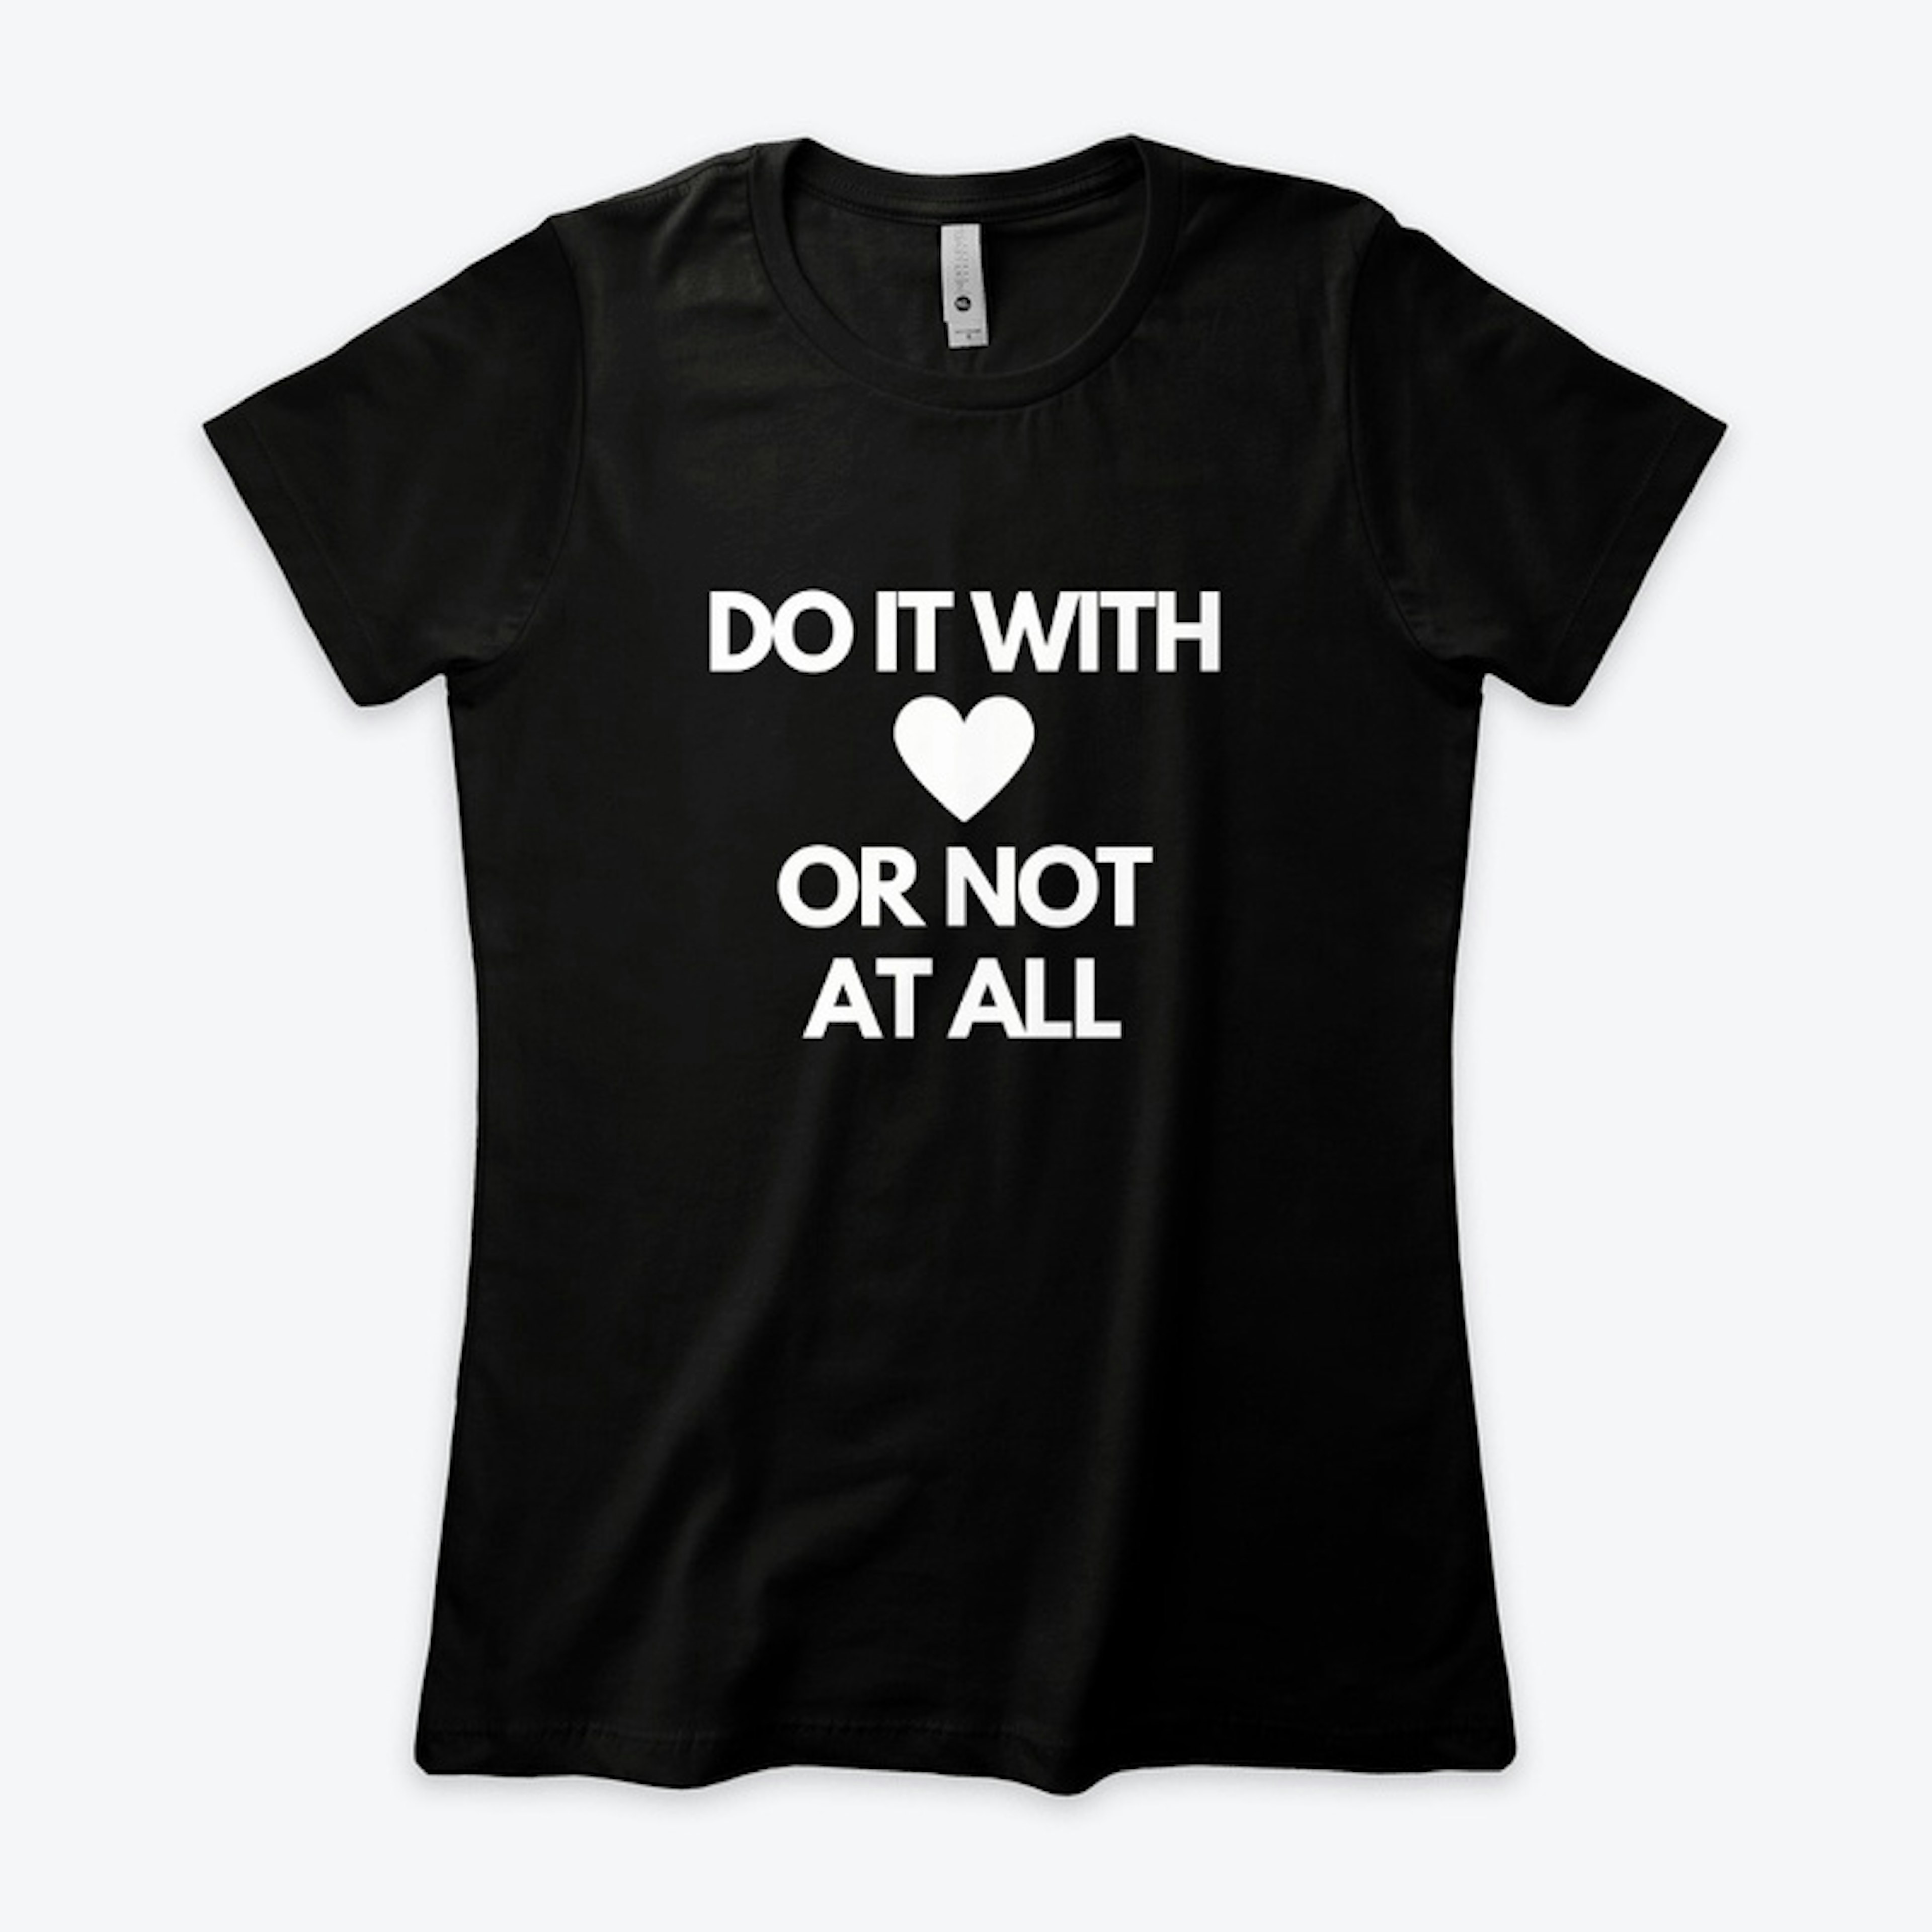 Do it with love tee